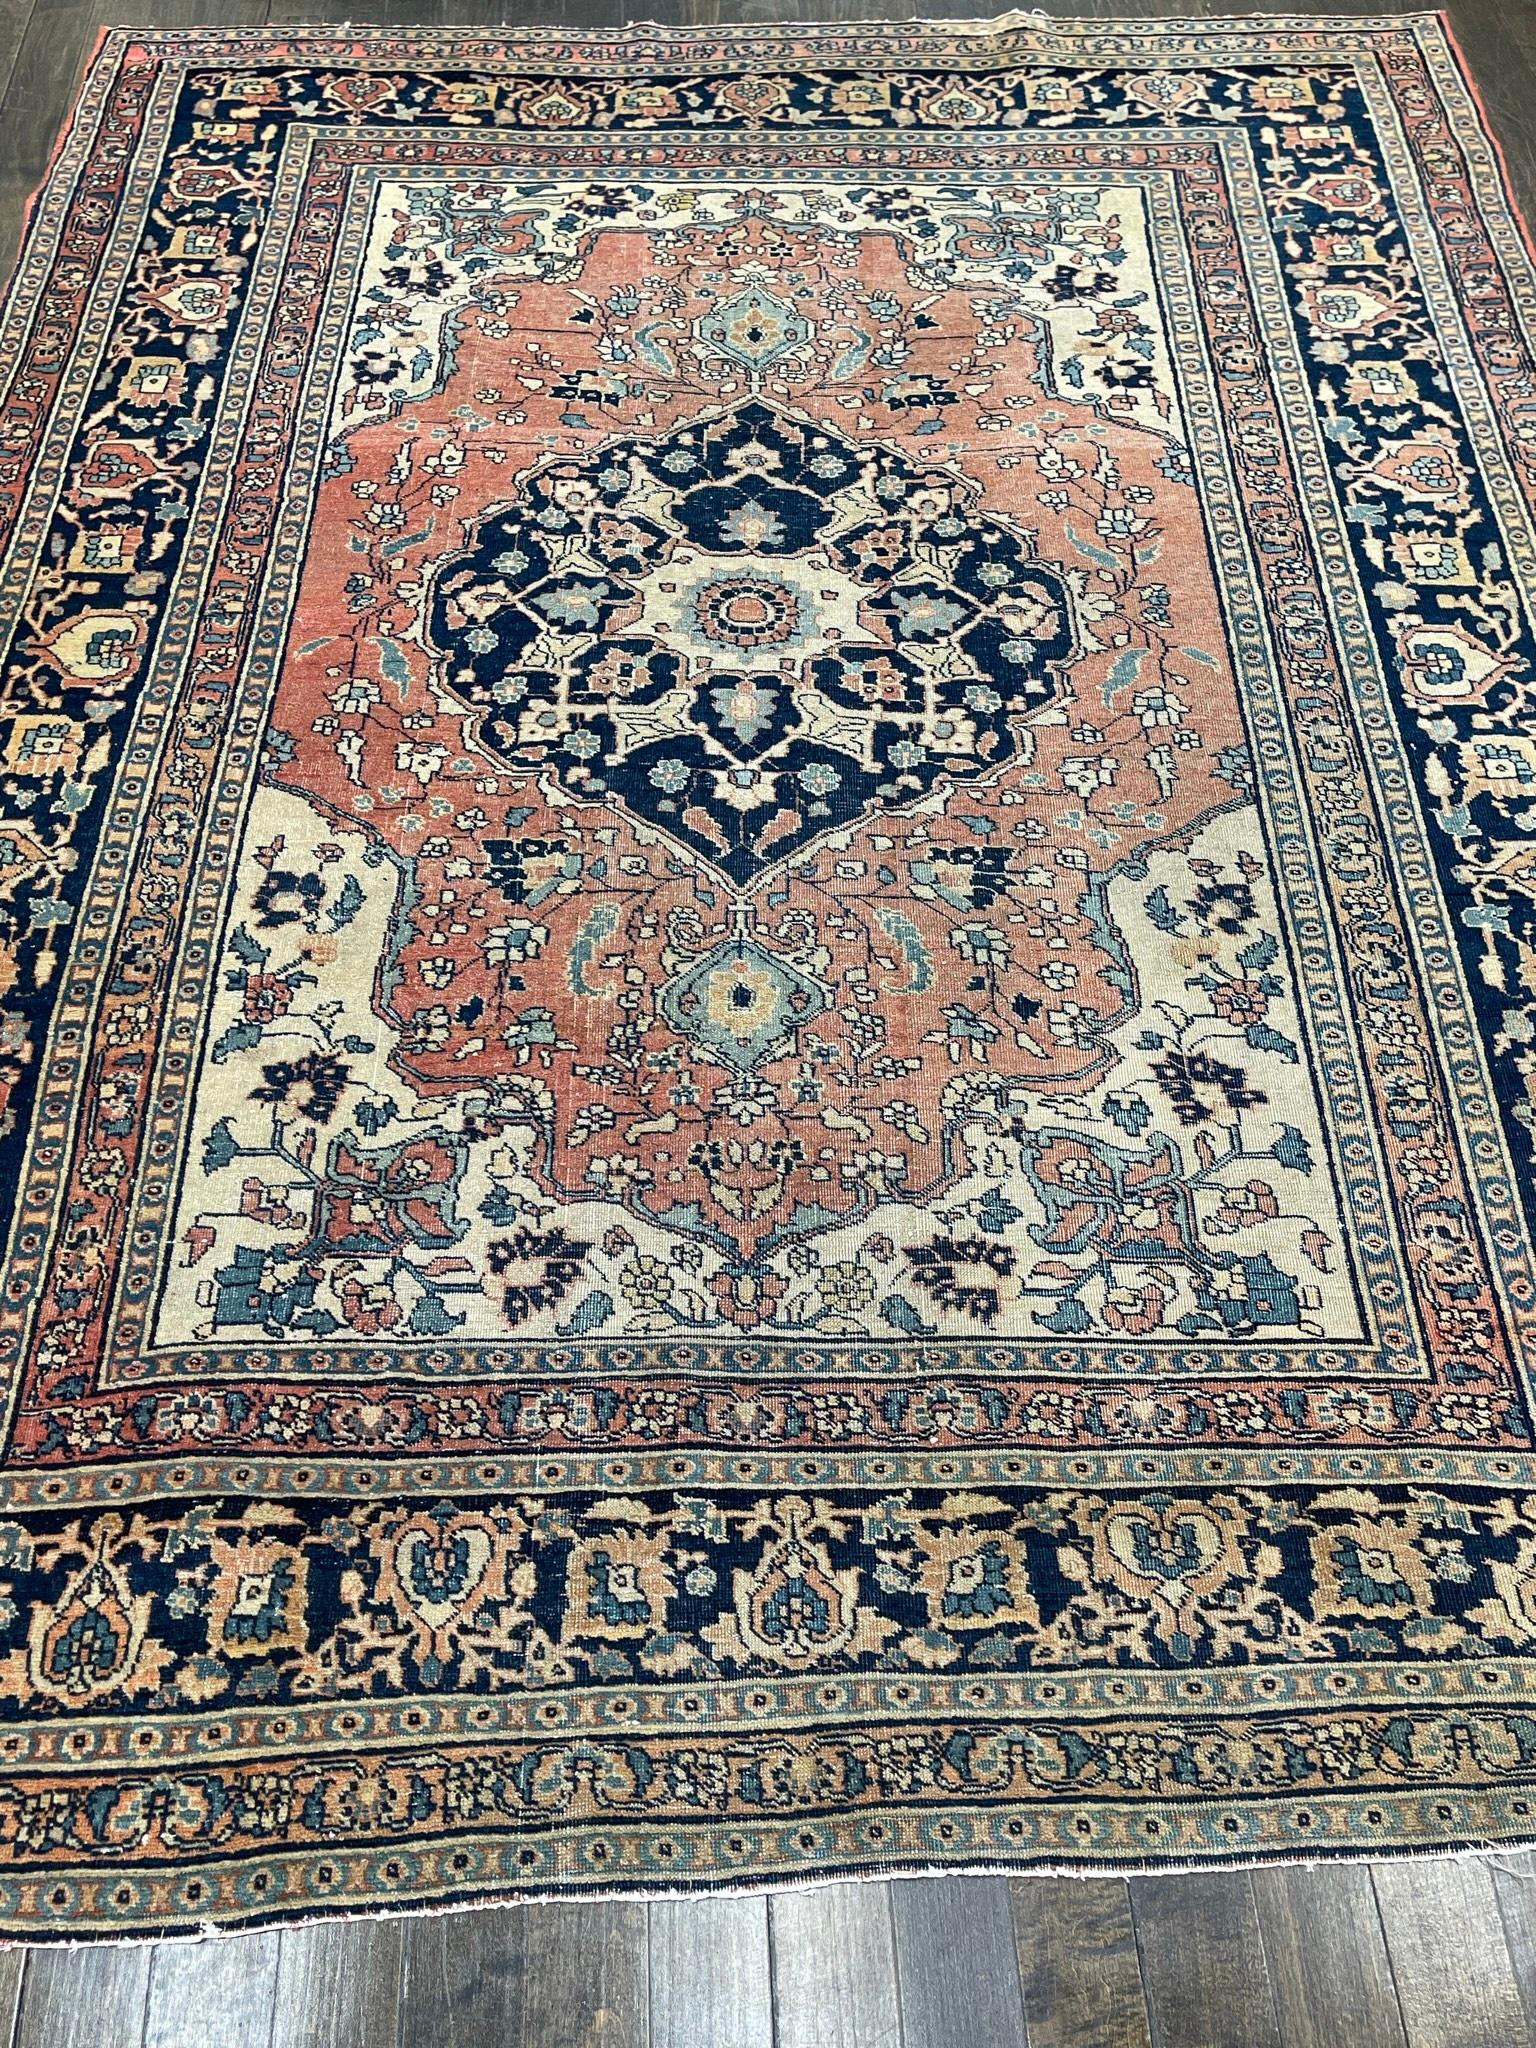 This rug is hand woven in the town of Tabriz,northwest Persia. Tabriz rugs are double-wefted woven on a cotton foundation,with Turkish knots. Tabriz medallion rugs often resemble those of Kerman and Kashan but they are easily distinguished by their